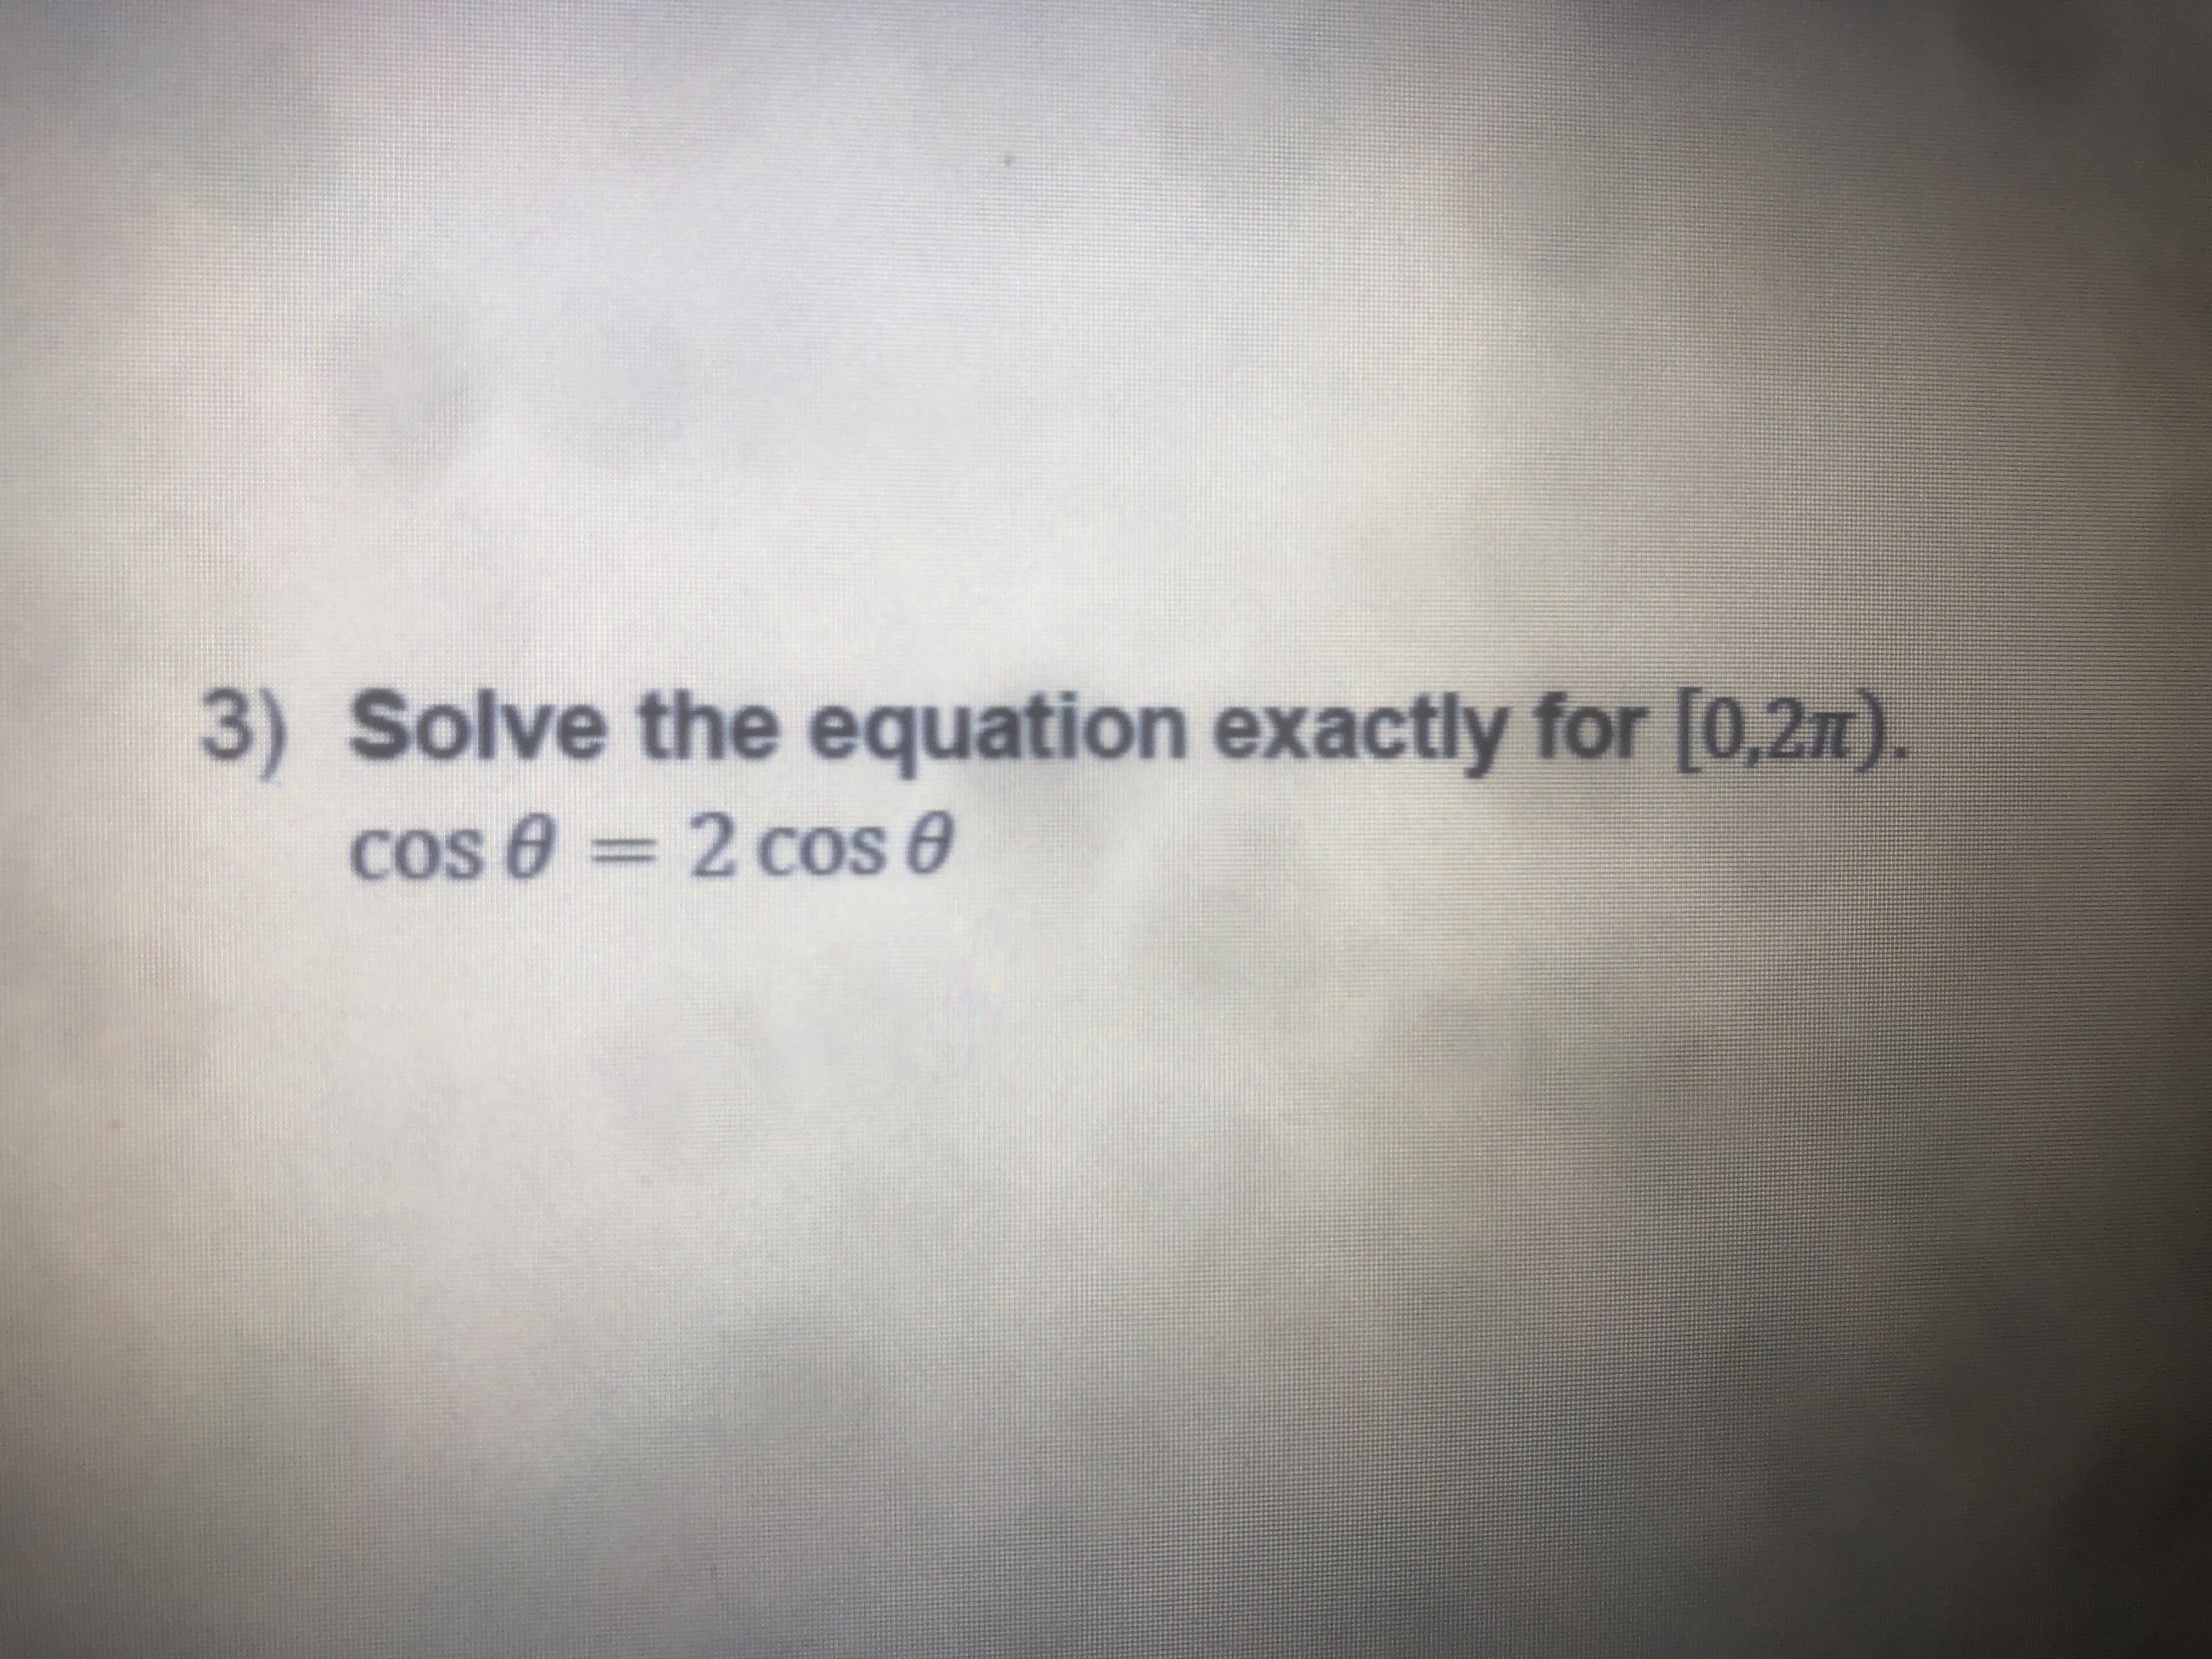 3) Solve the equation exactly for [0,2n).
Cos 8 = 2 cos 0
